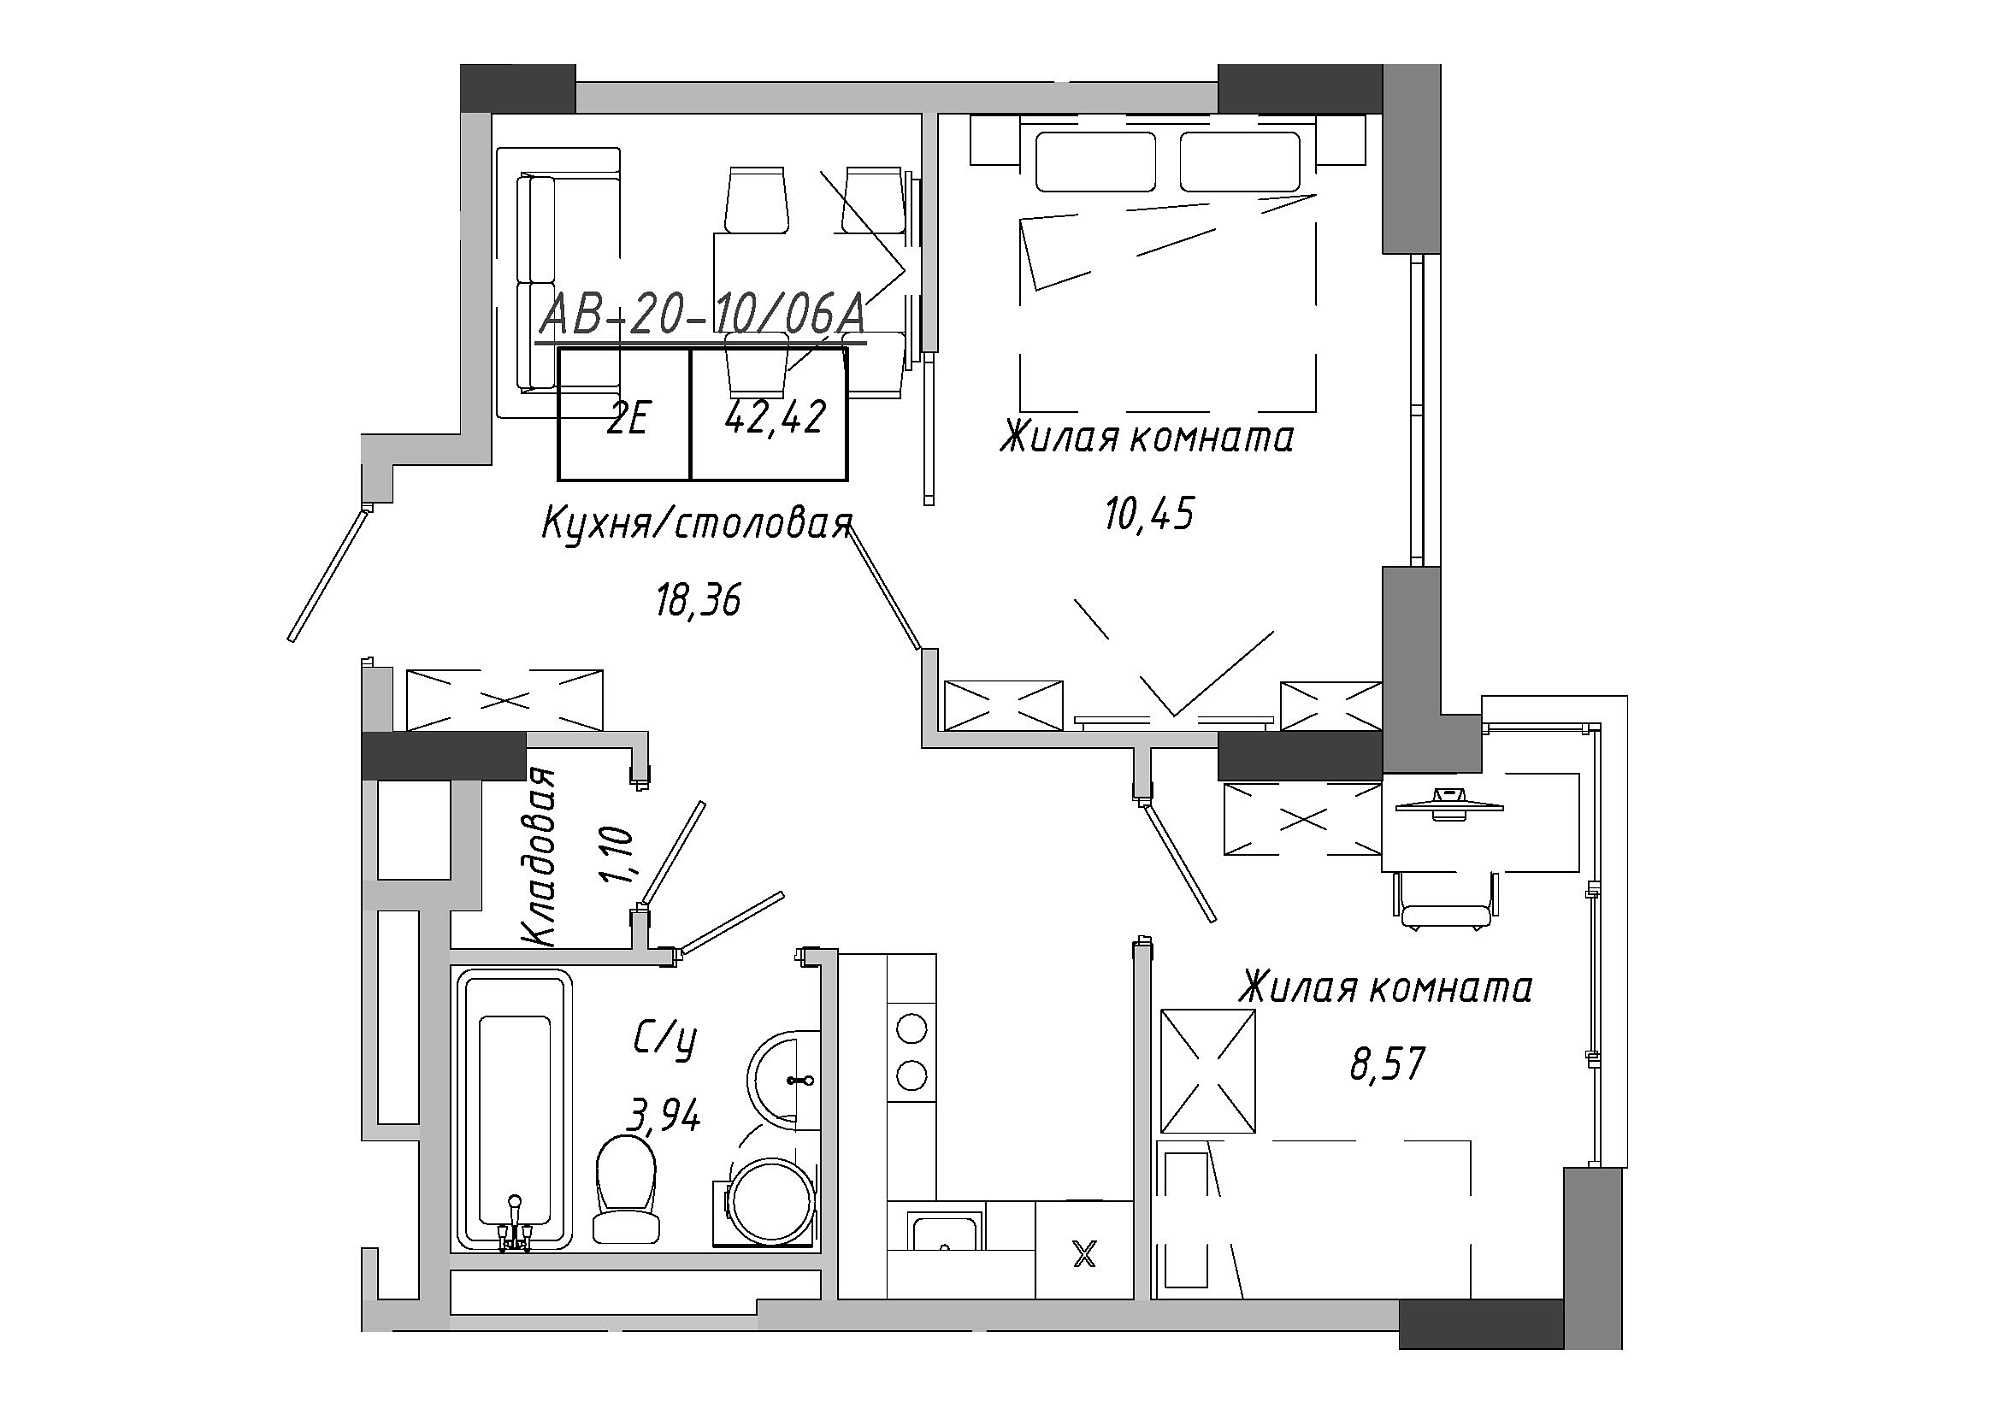 Planning 2-rm flats area 42.85m2, AB-20-10/0006а.